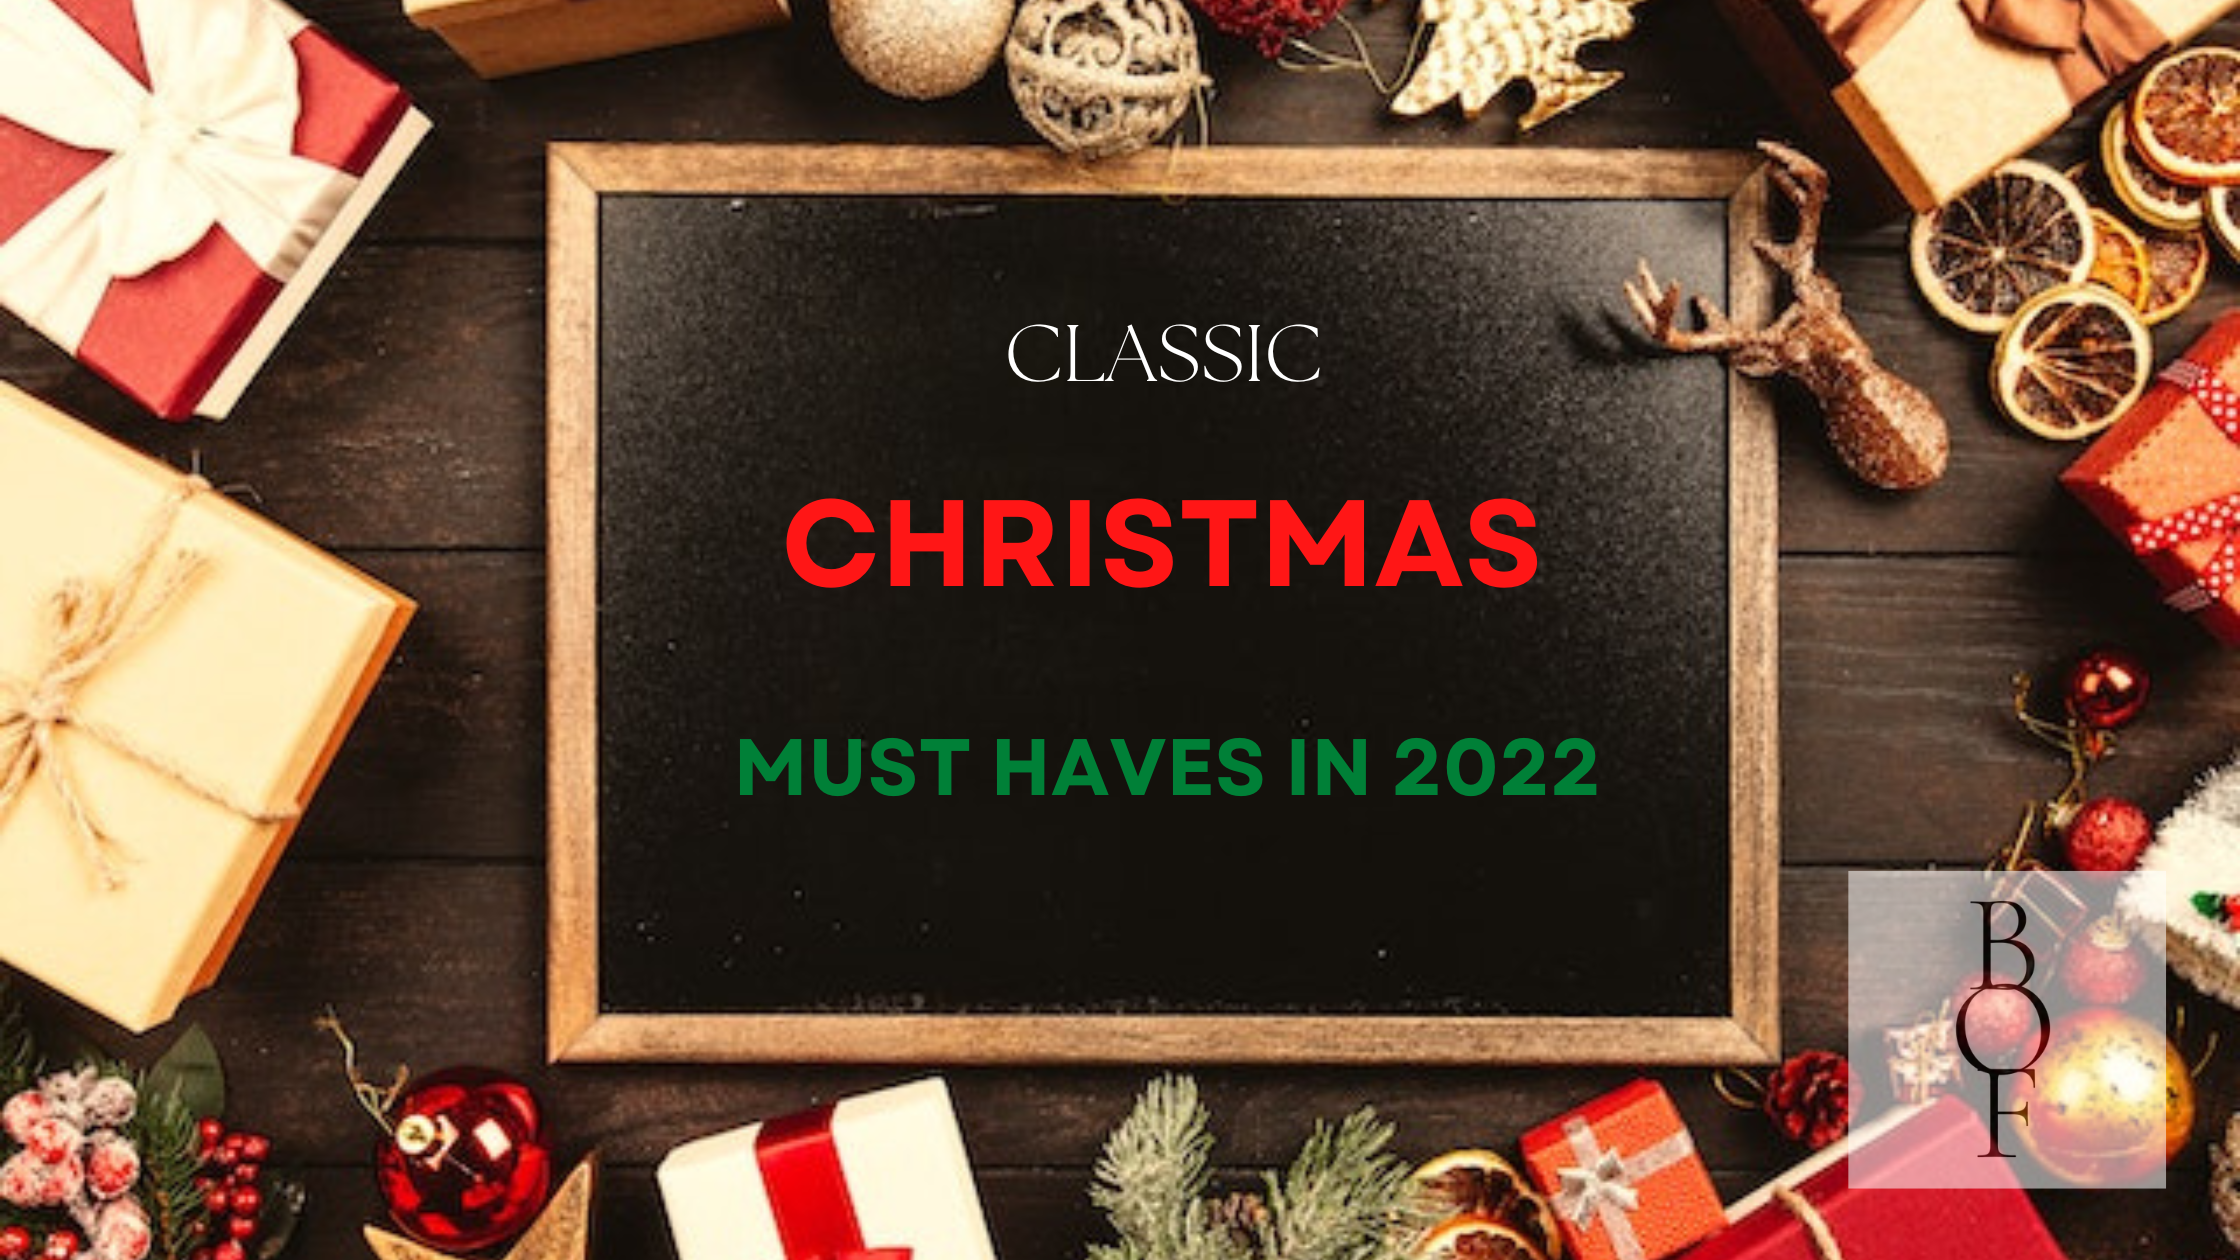 Classic Christmas must-haves in 2022